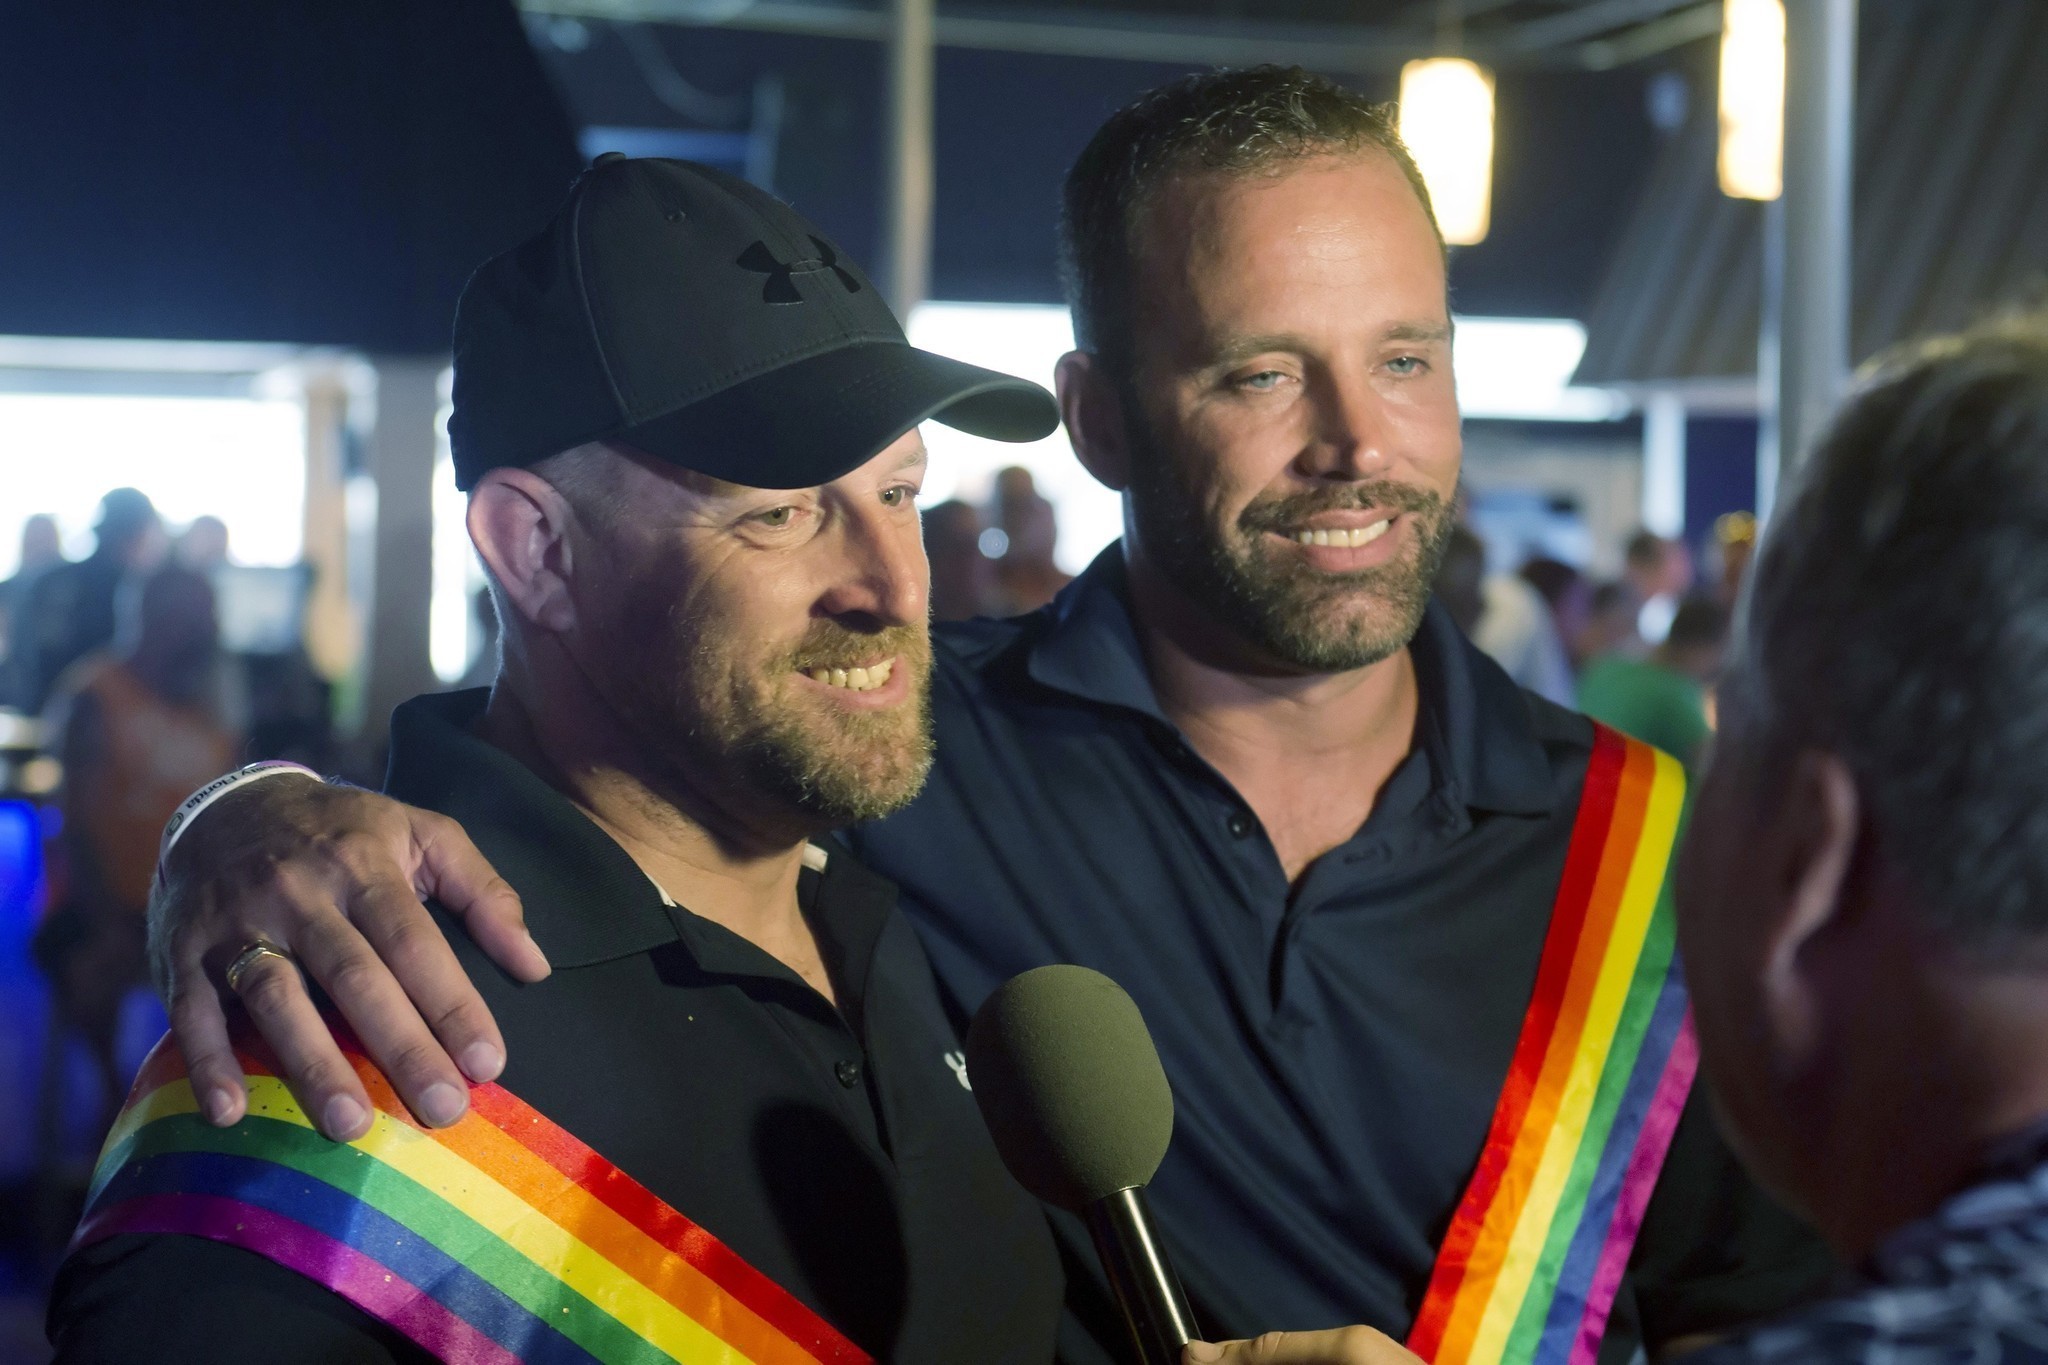 Florida S Gay Marriage Ban Struck Down By Federal Judge